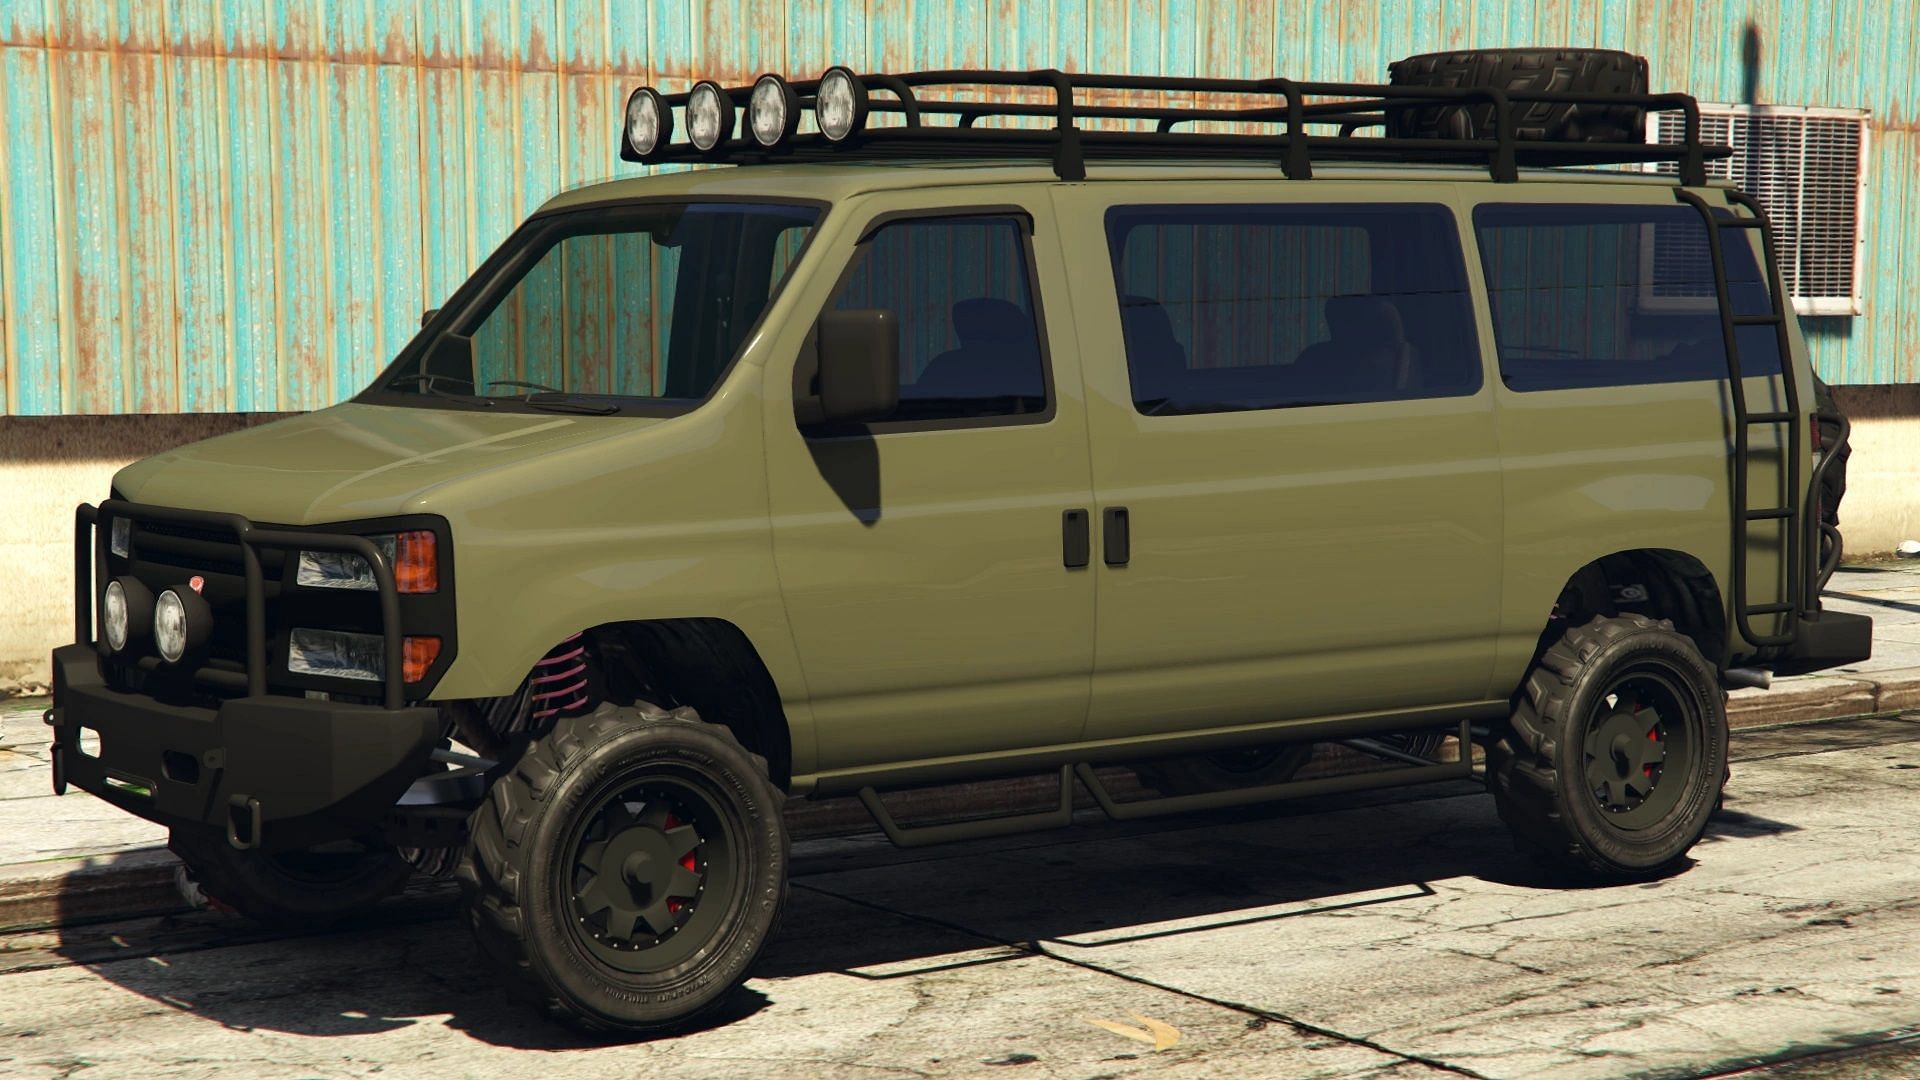 This vehicle is often used in Sale Mission [Image via The Urban Shamaness]